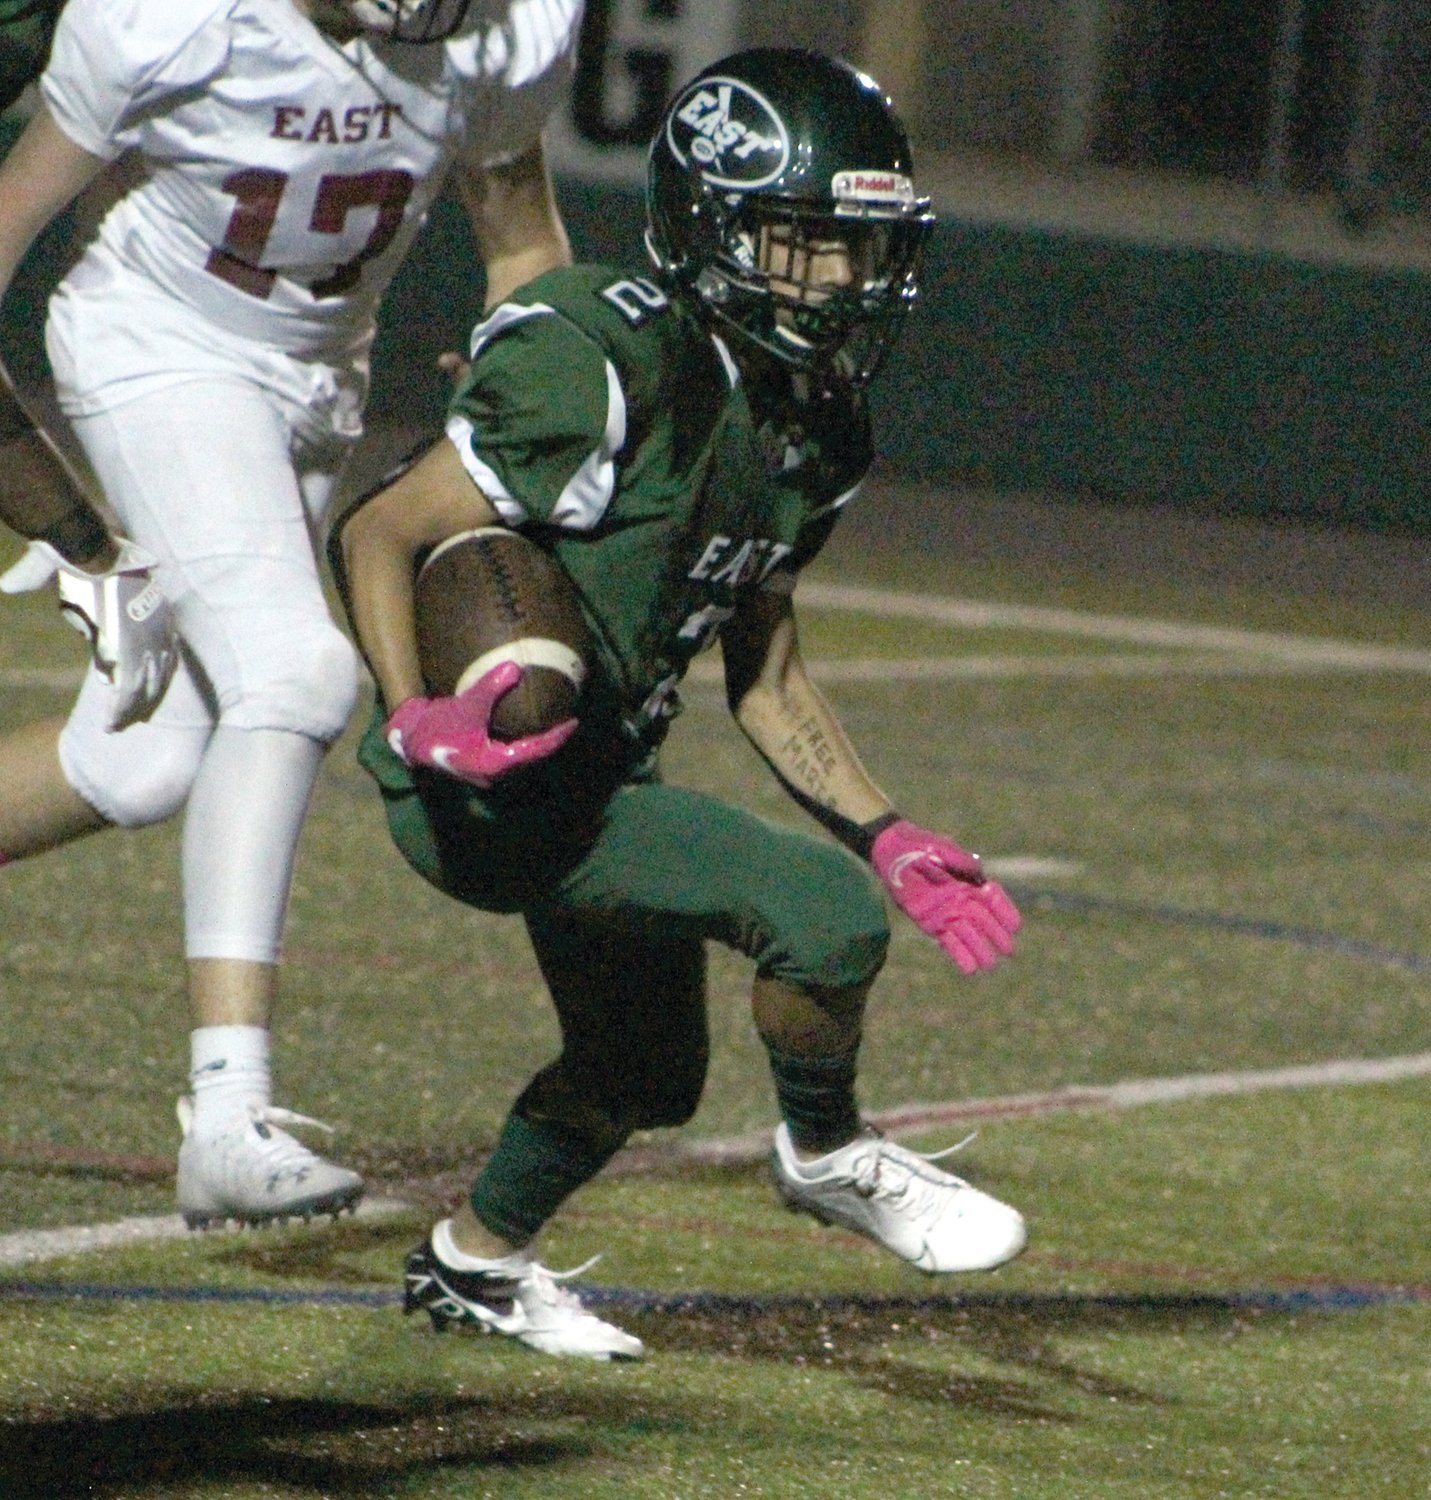 UP THE FIELD: Cranston East’s Romeo Cordero
picks up some yards.